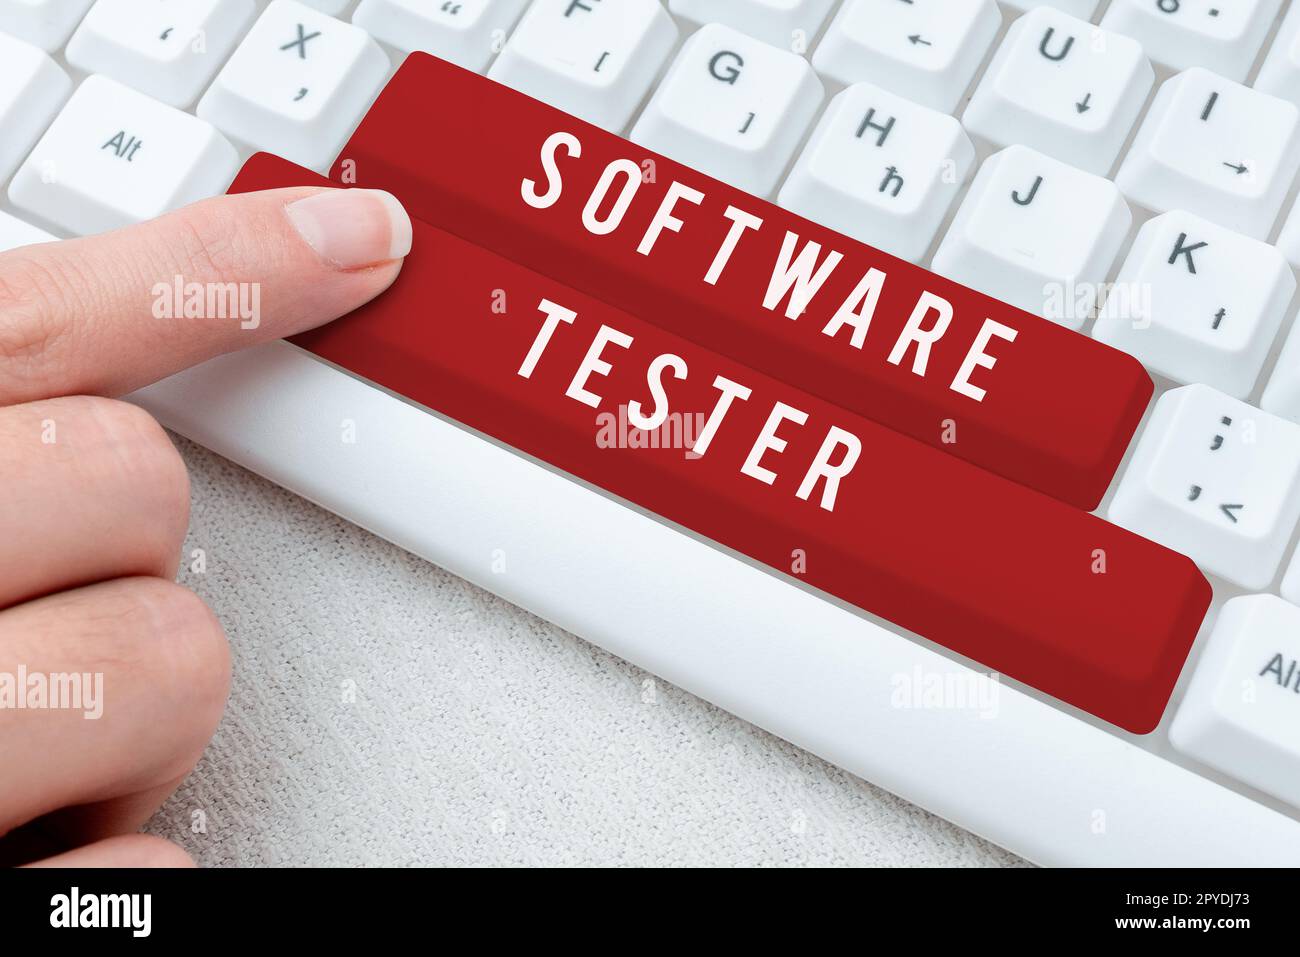 Text caption presenting Software Tester. Business showcase implemented to protect software against malicious attack Stock Photo